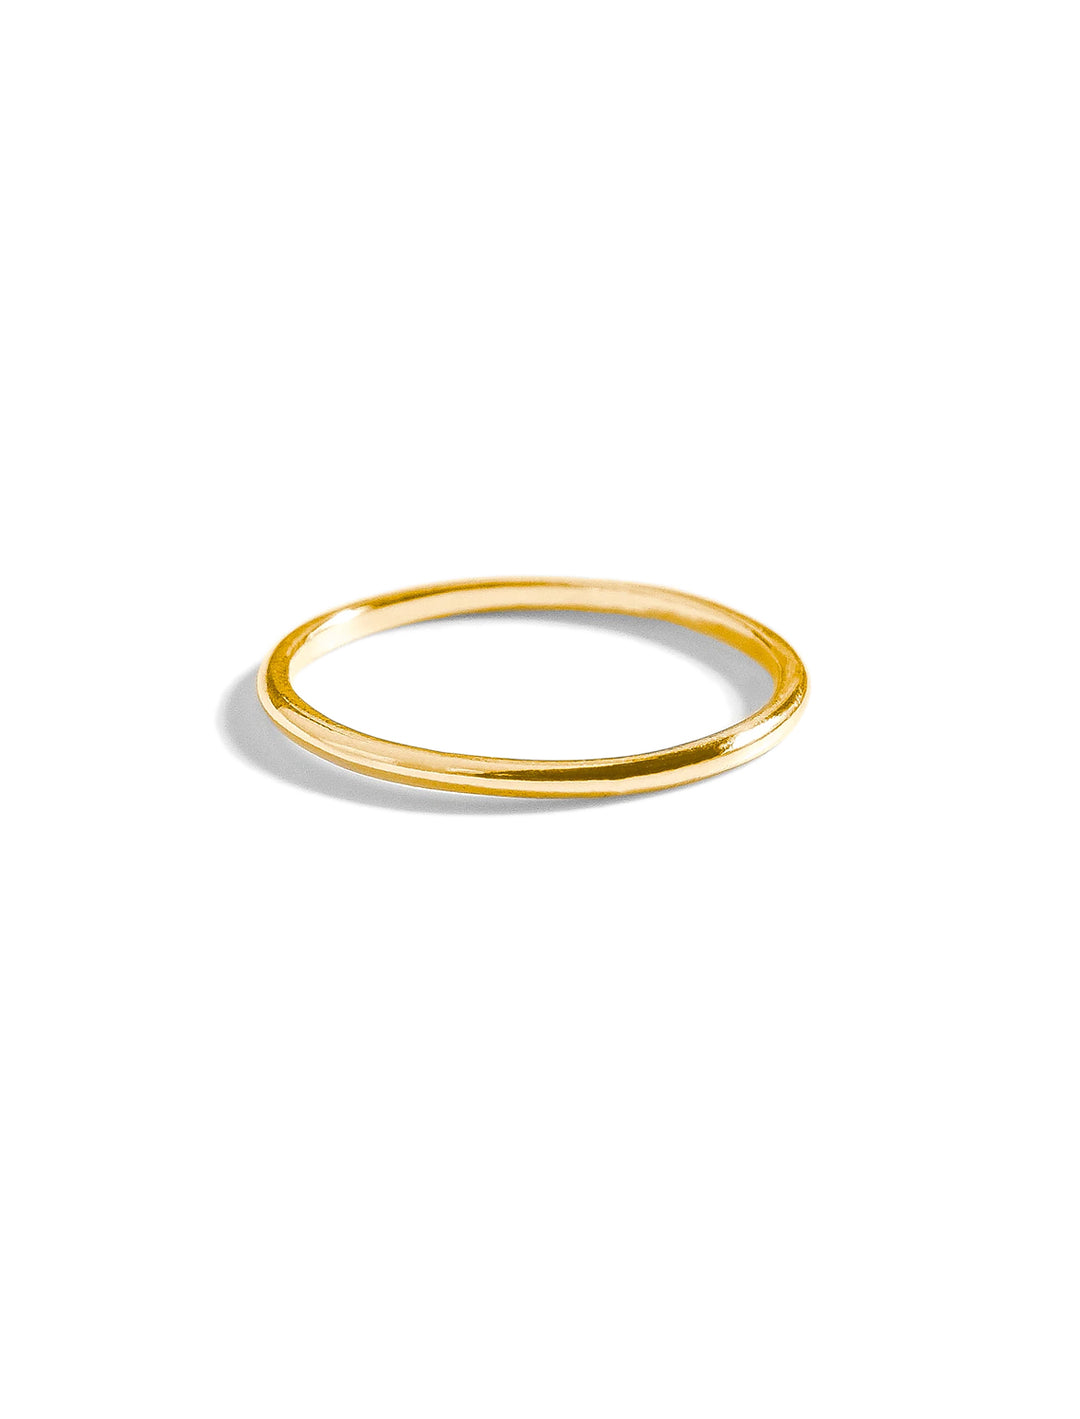 Front view of THATCH's 14k gold plated dainty stacking ring.